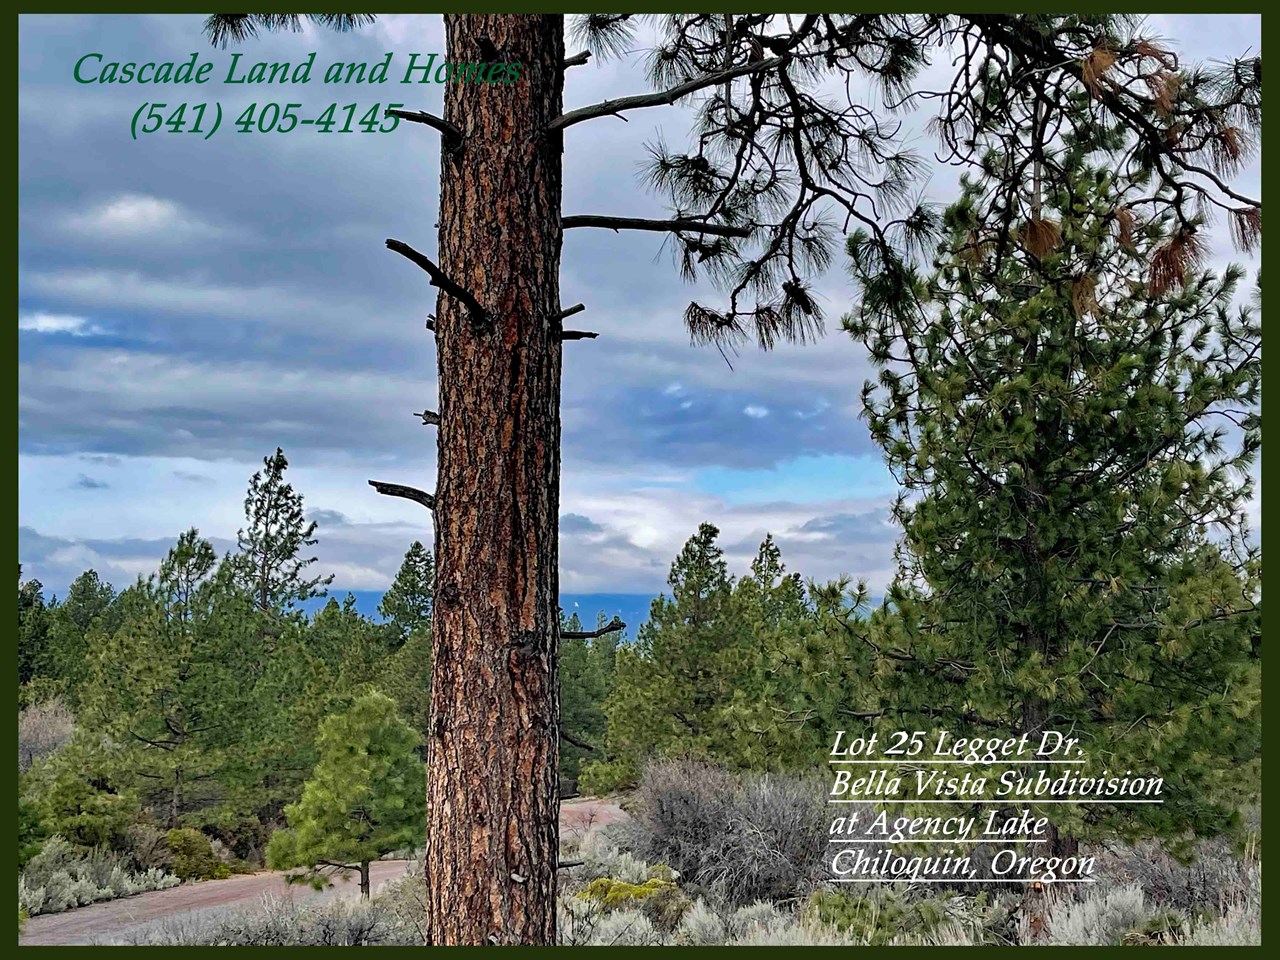 the property has gorgeous mature pine trees!